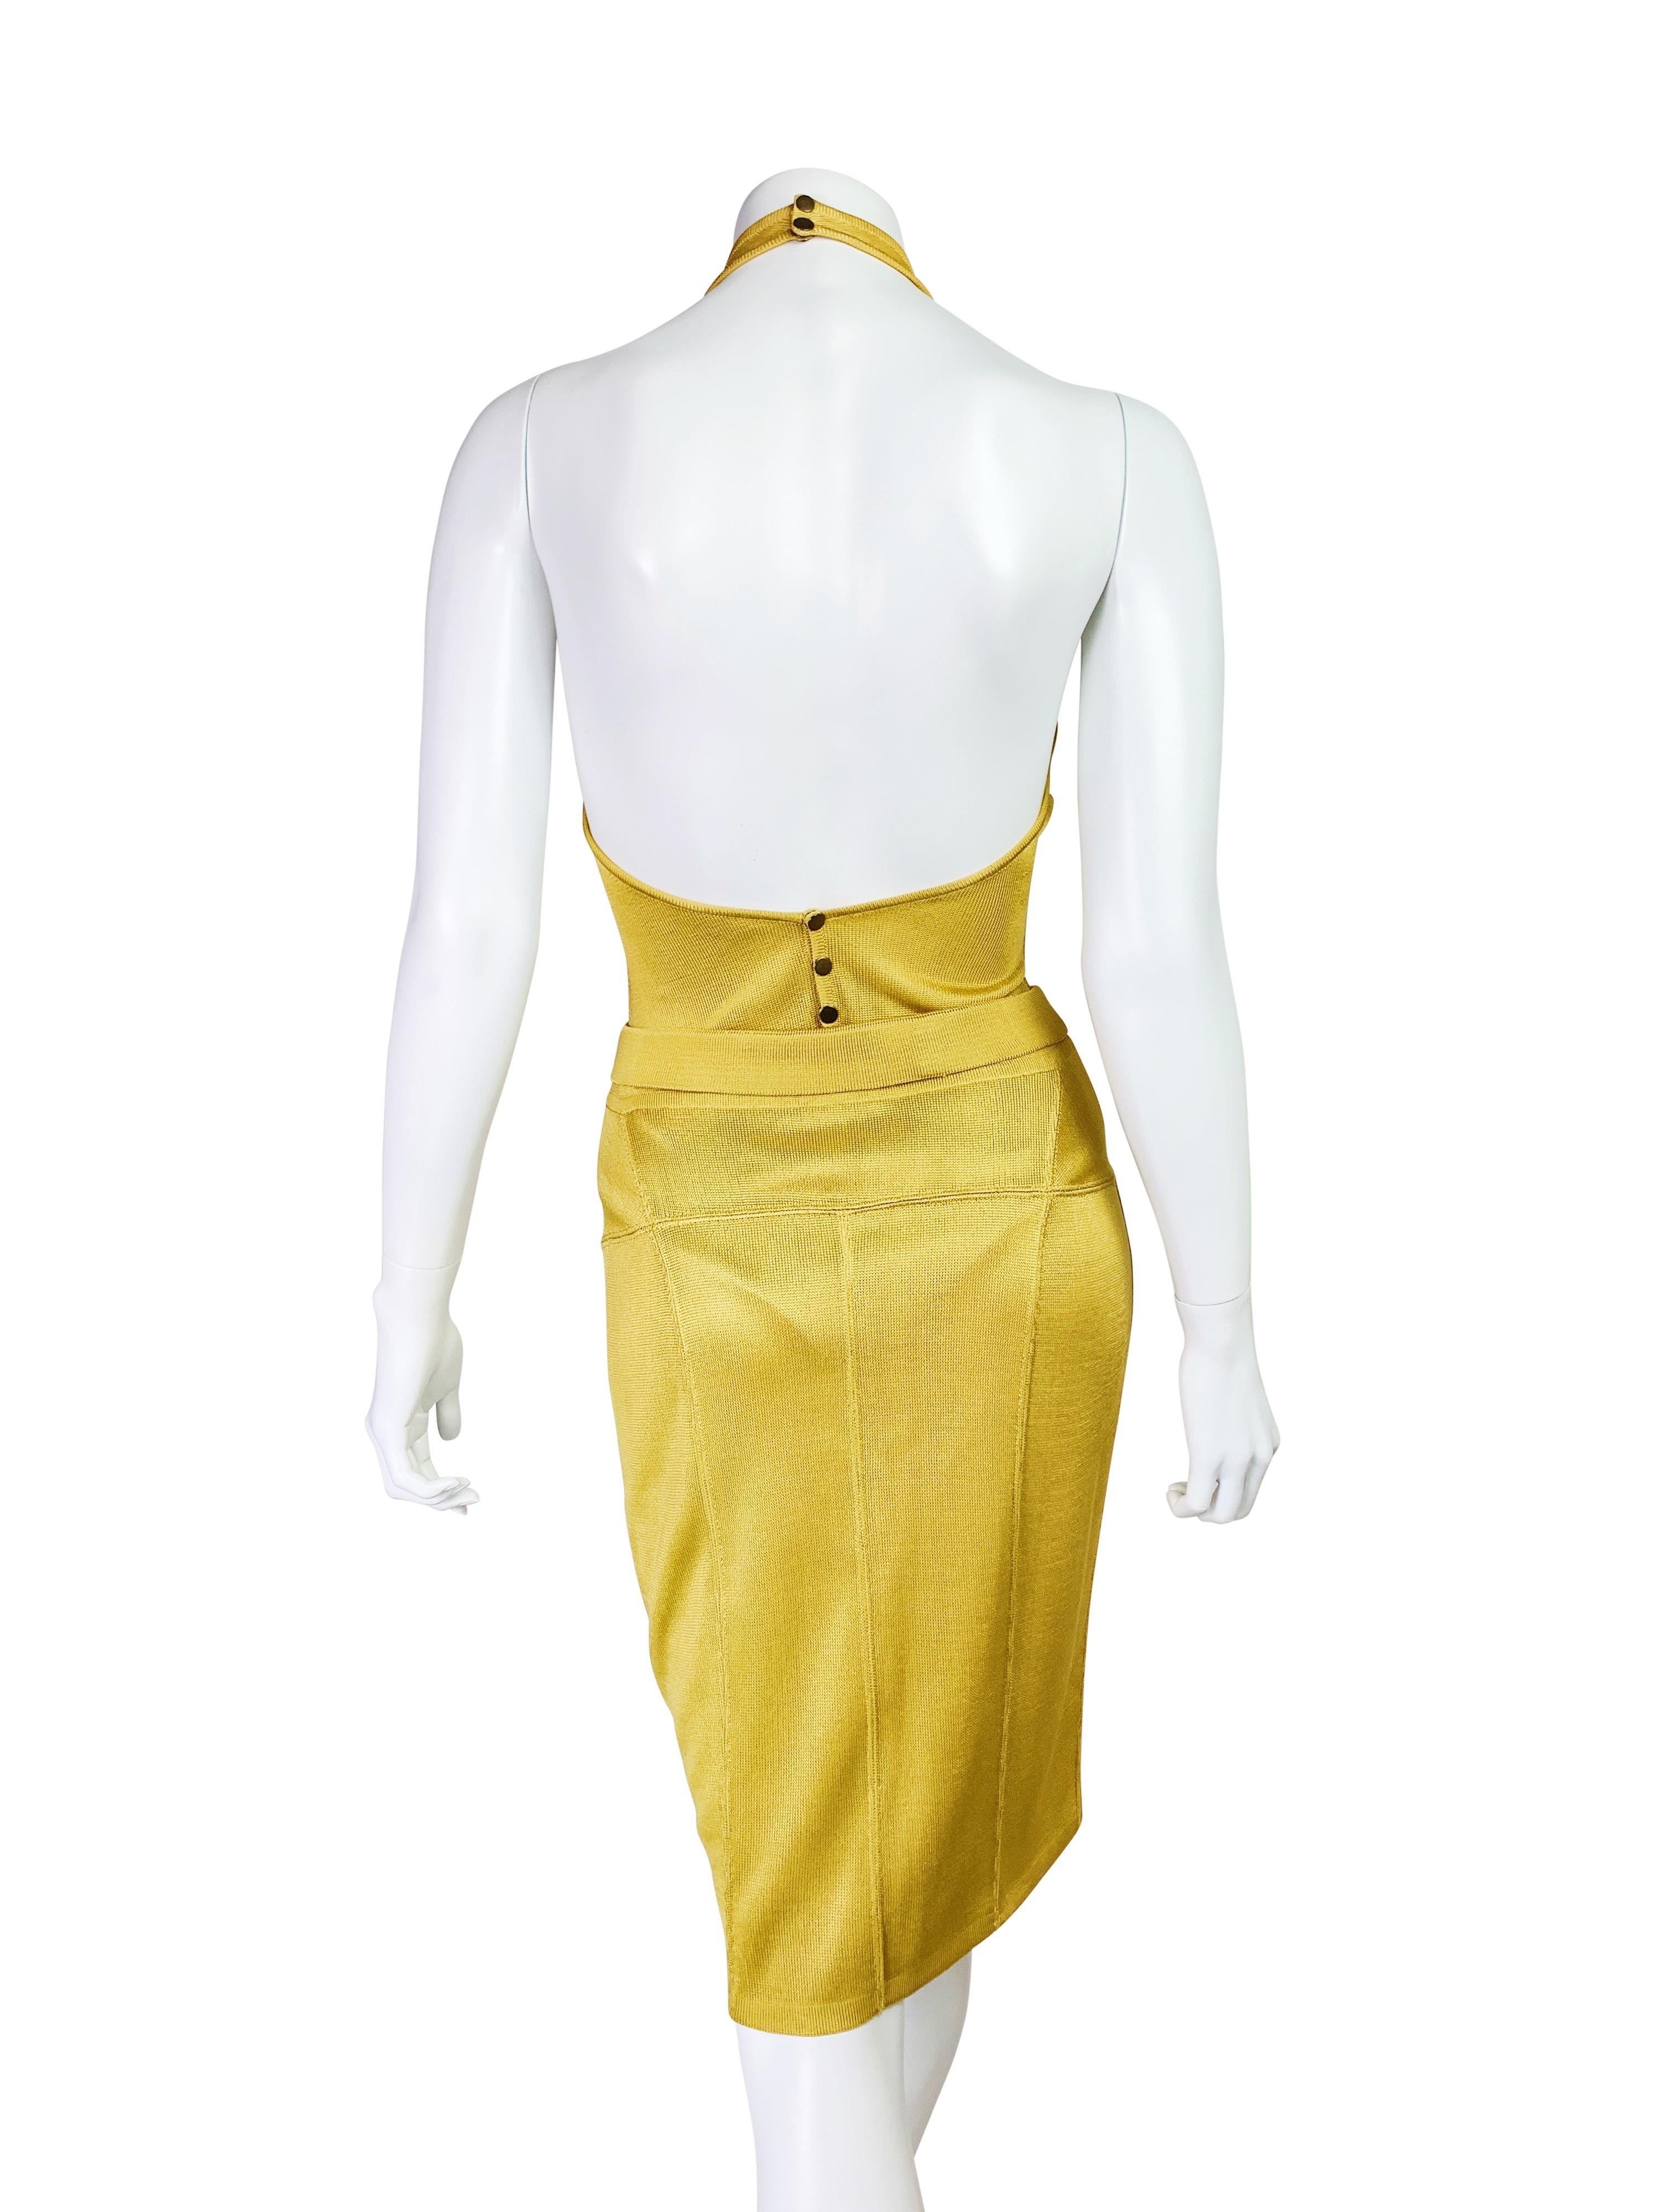 Azzedine Alaïa Spring 1986 Bandage Skirt and Bodysuit set In Excellent Condition For Sale In Prague, CZ